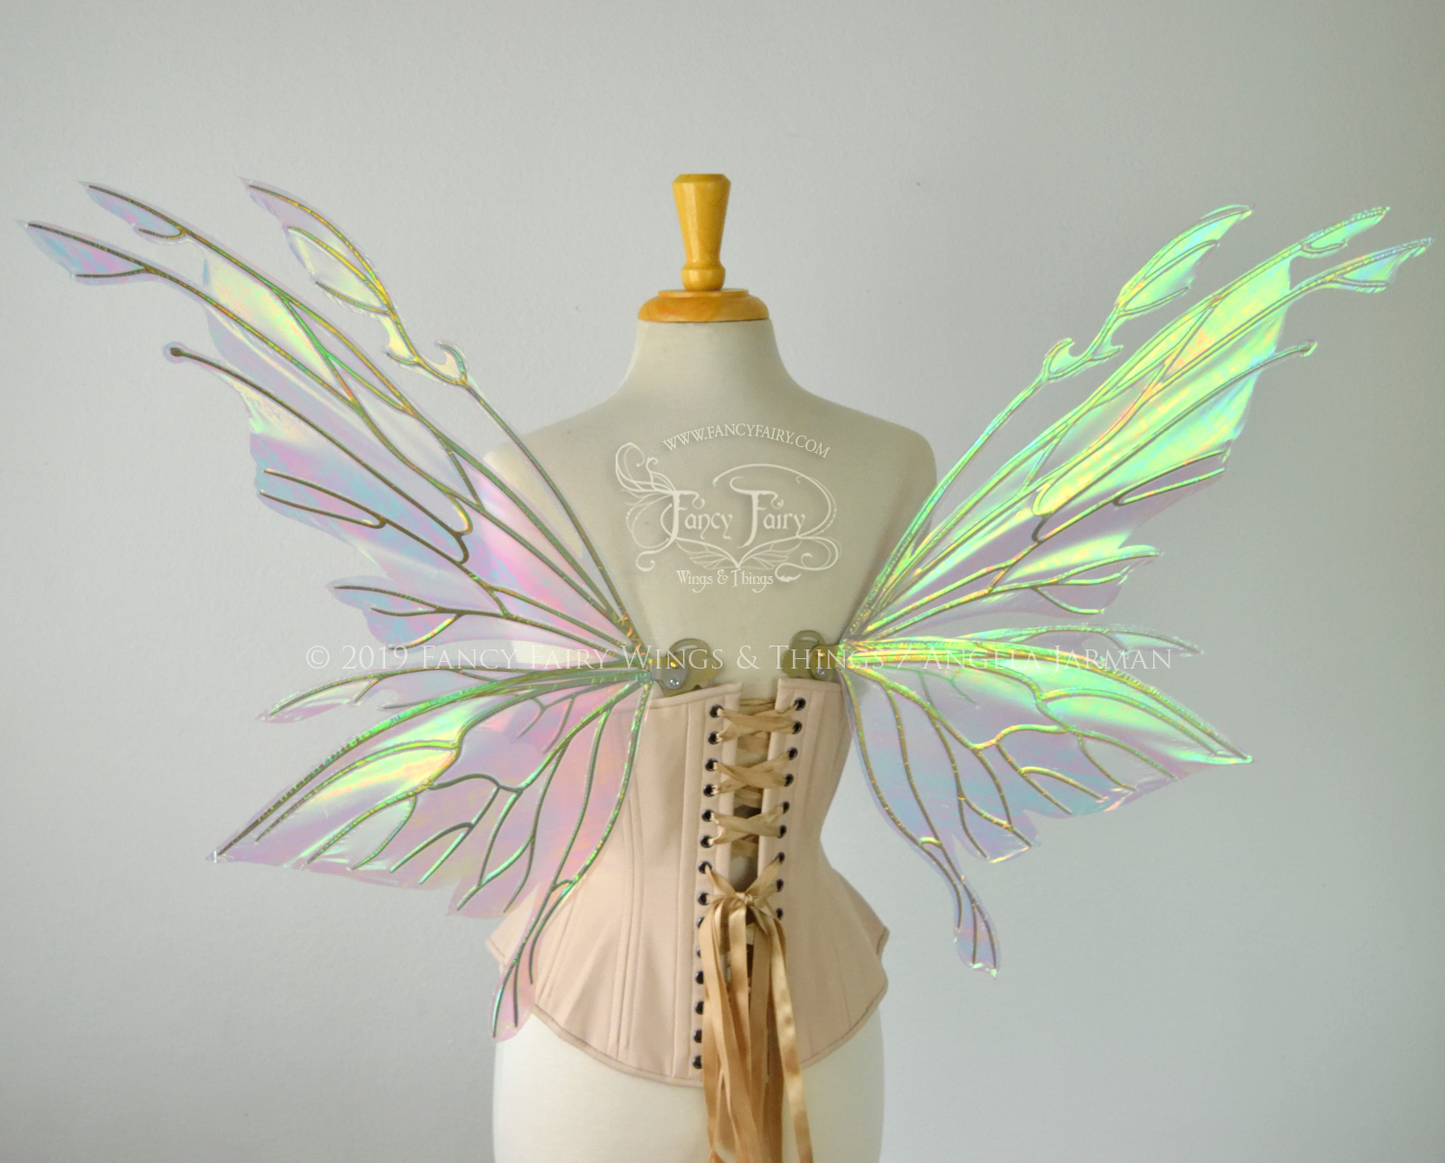 Goblin Princess Convertible Iridescent Fairy Wings in Satin White with Candy Gold Veins